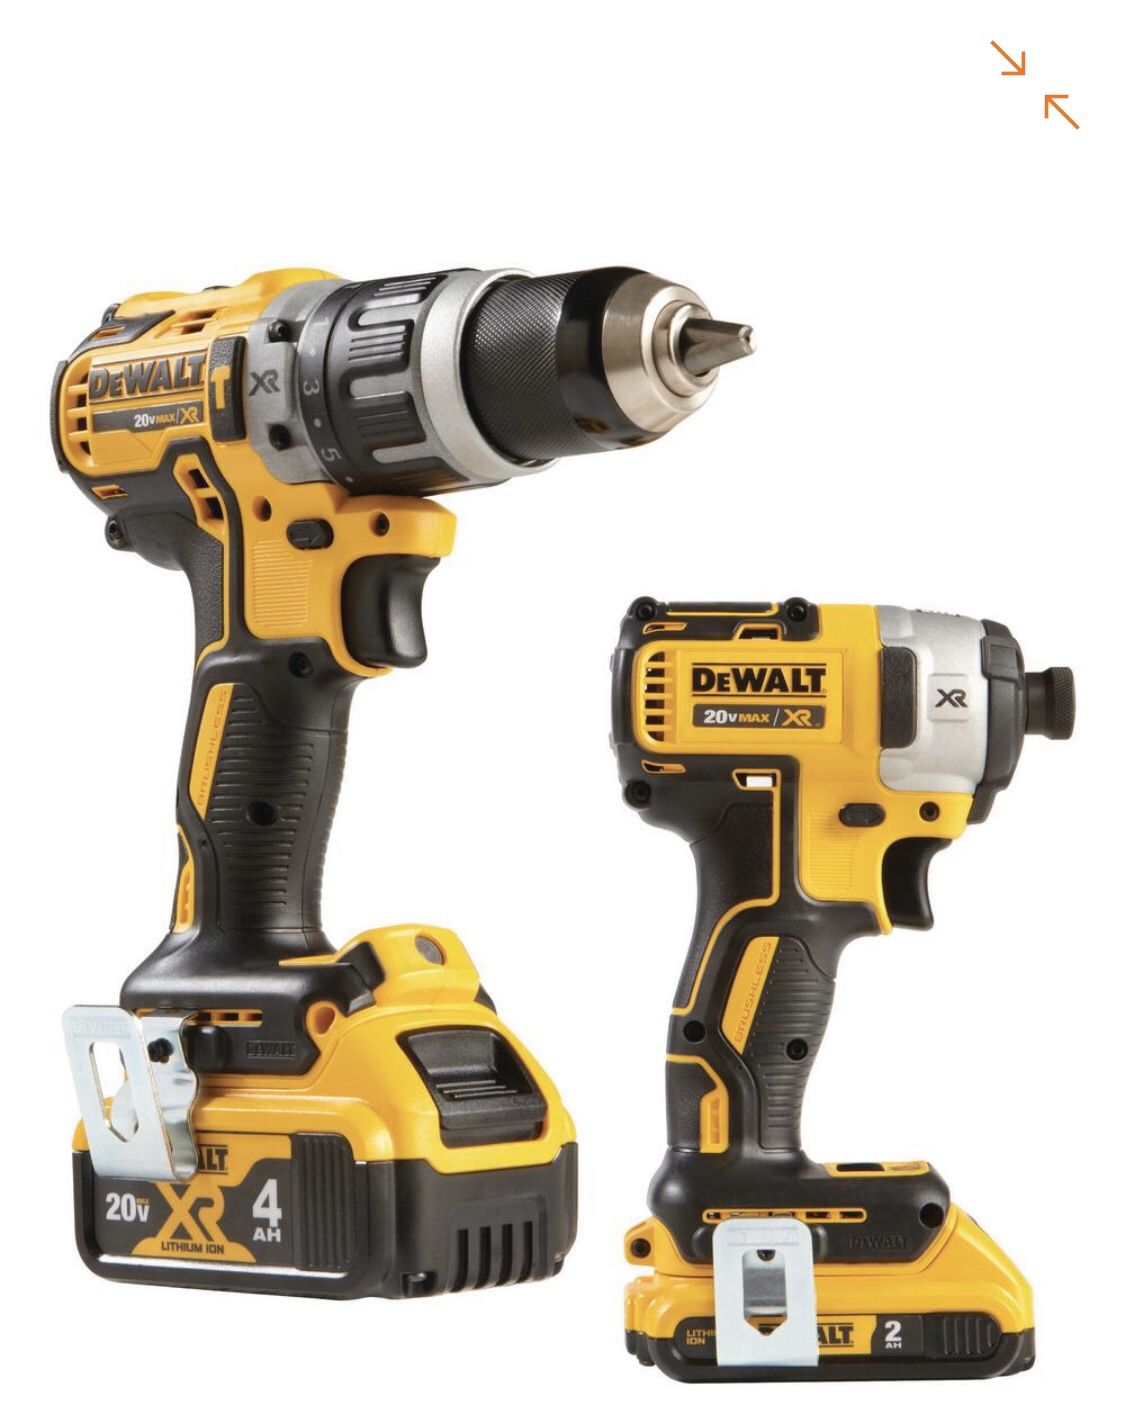 DEWALT 20-Volt MAX XR Lithium-Ion Cordless Brushless Drill/Impact Combo Kit (2-Tool) with (1) Battery 2Ah and (1) Battery 4Ah